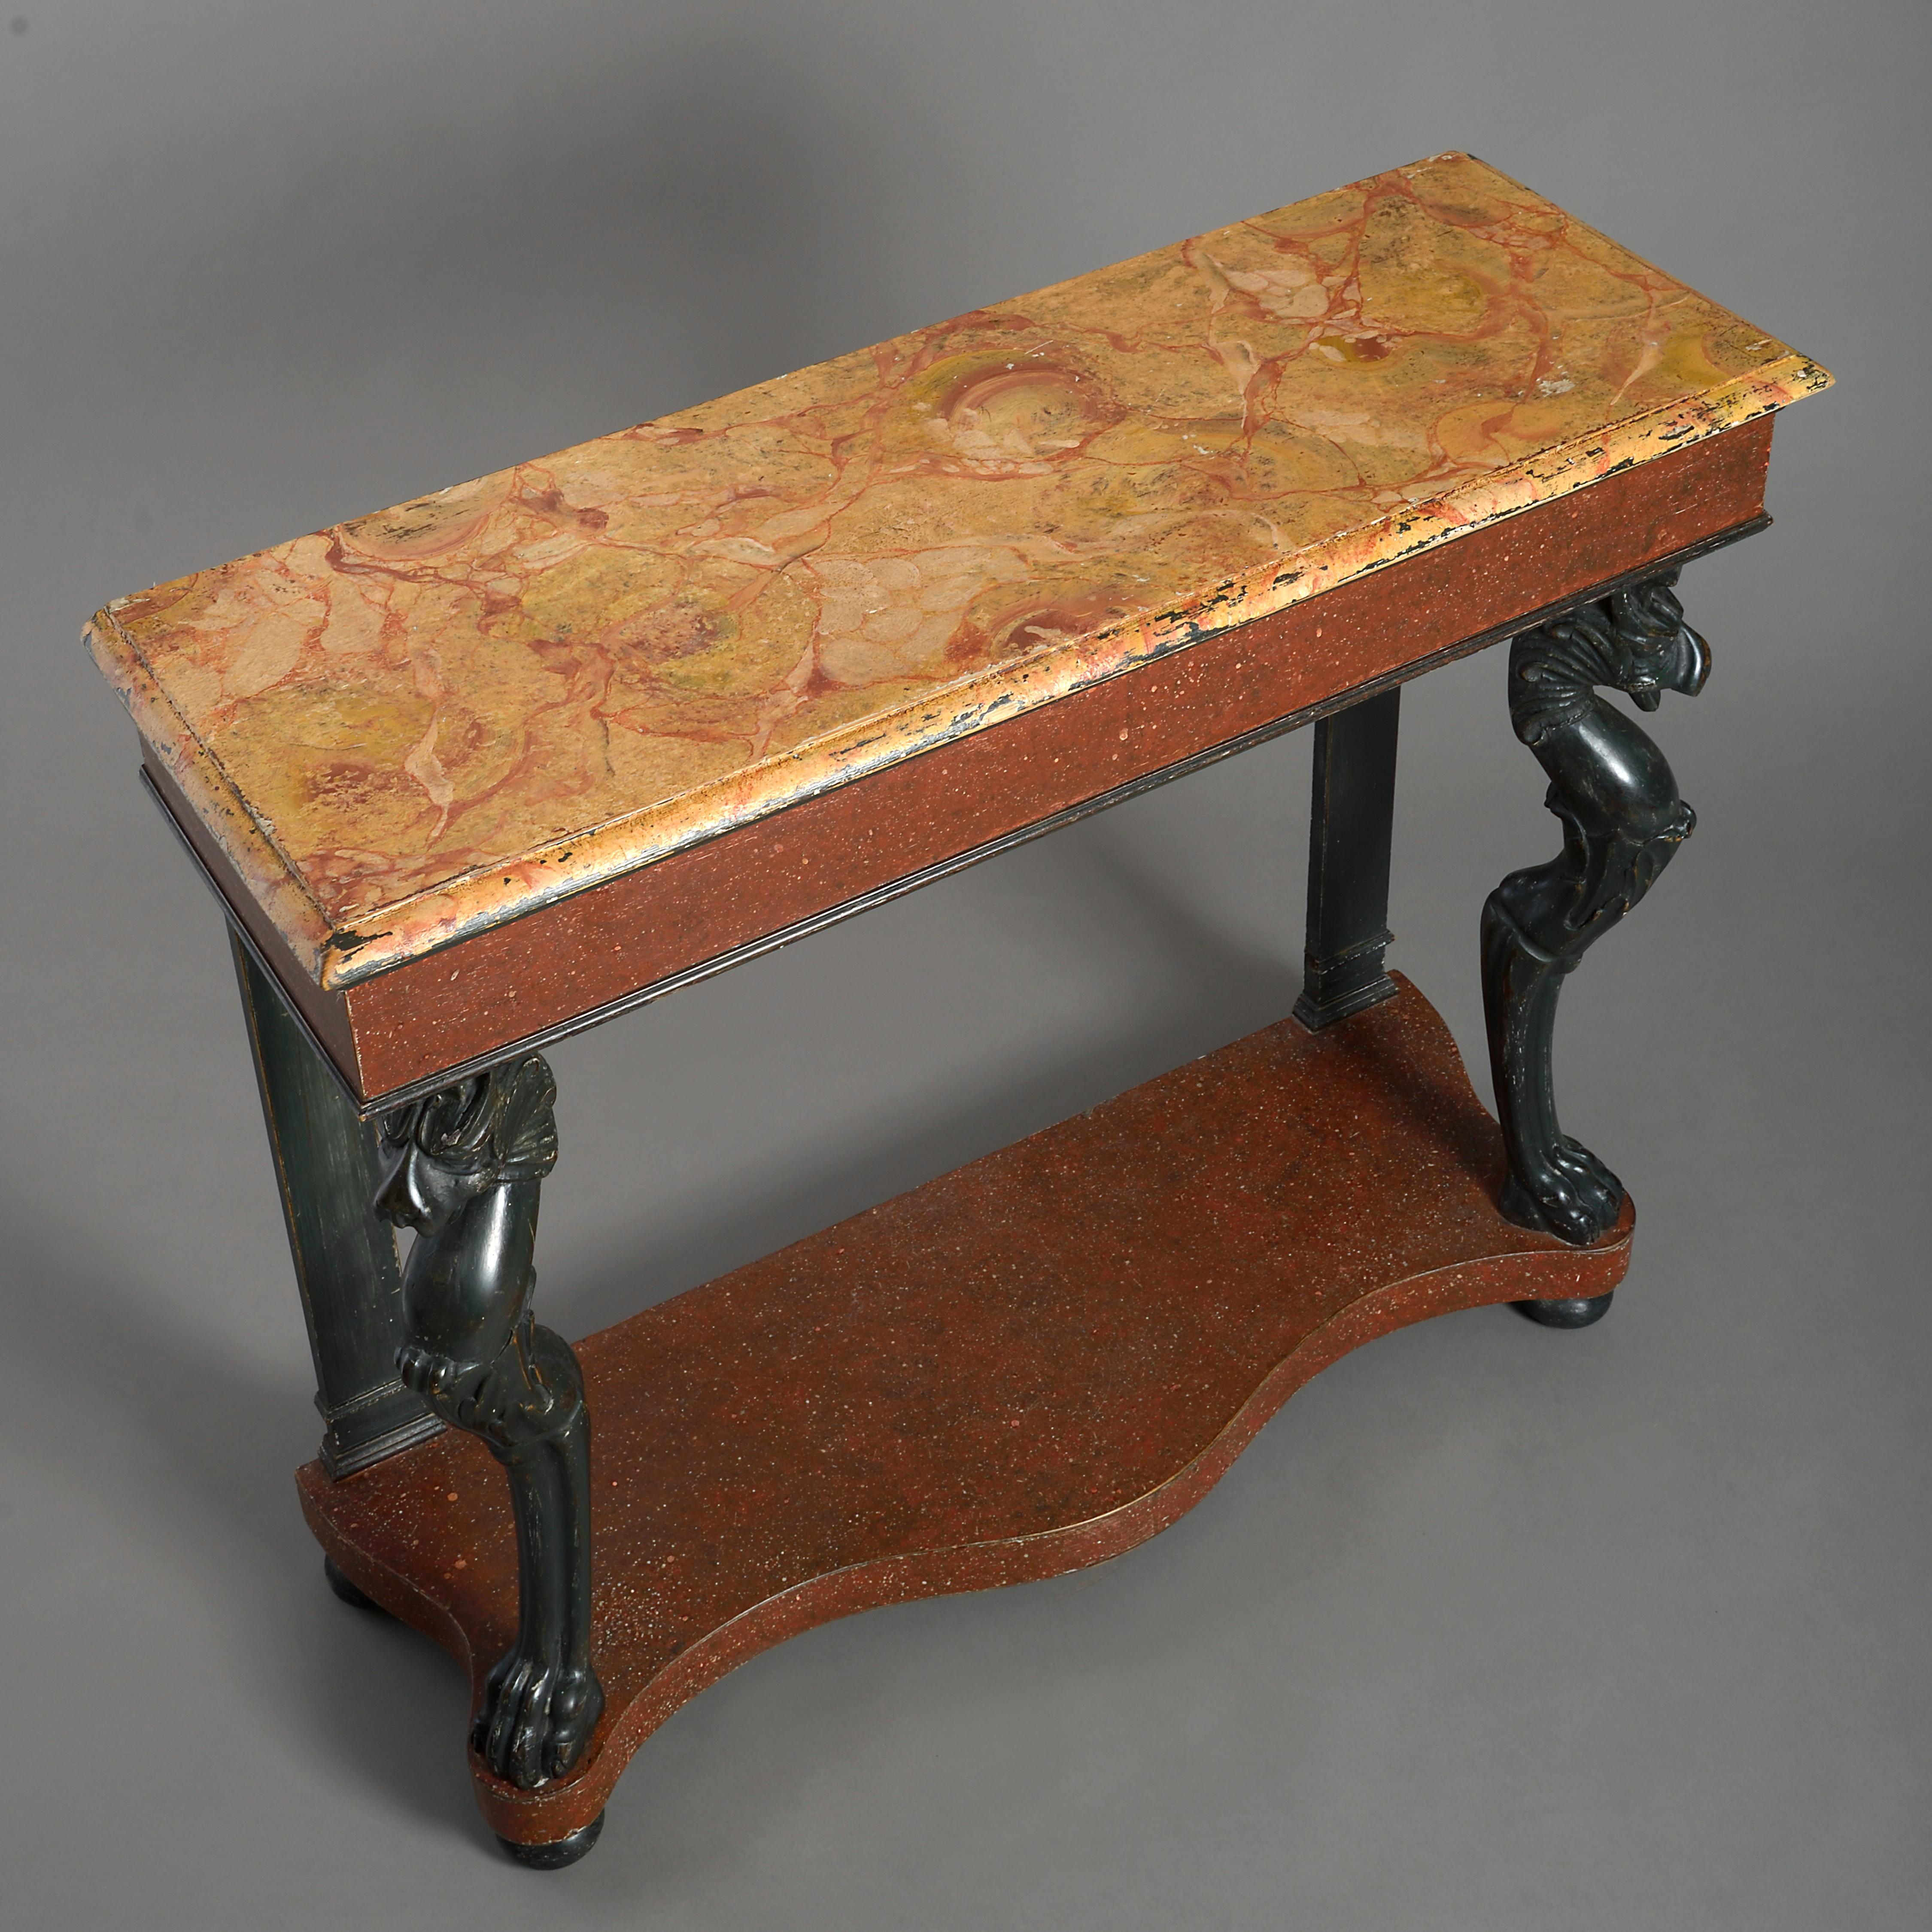 Hand-Painted 19th Century Painted Neoclassical Console Table